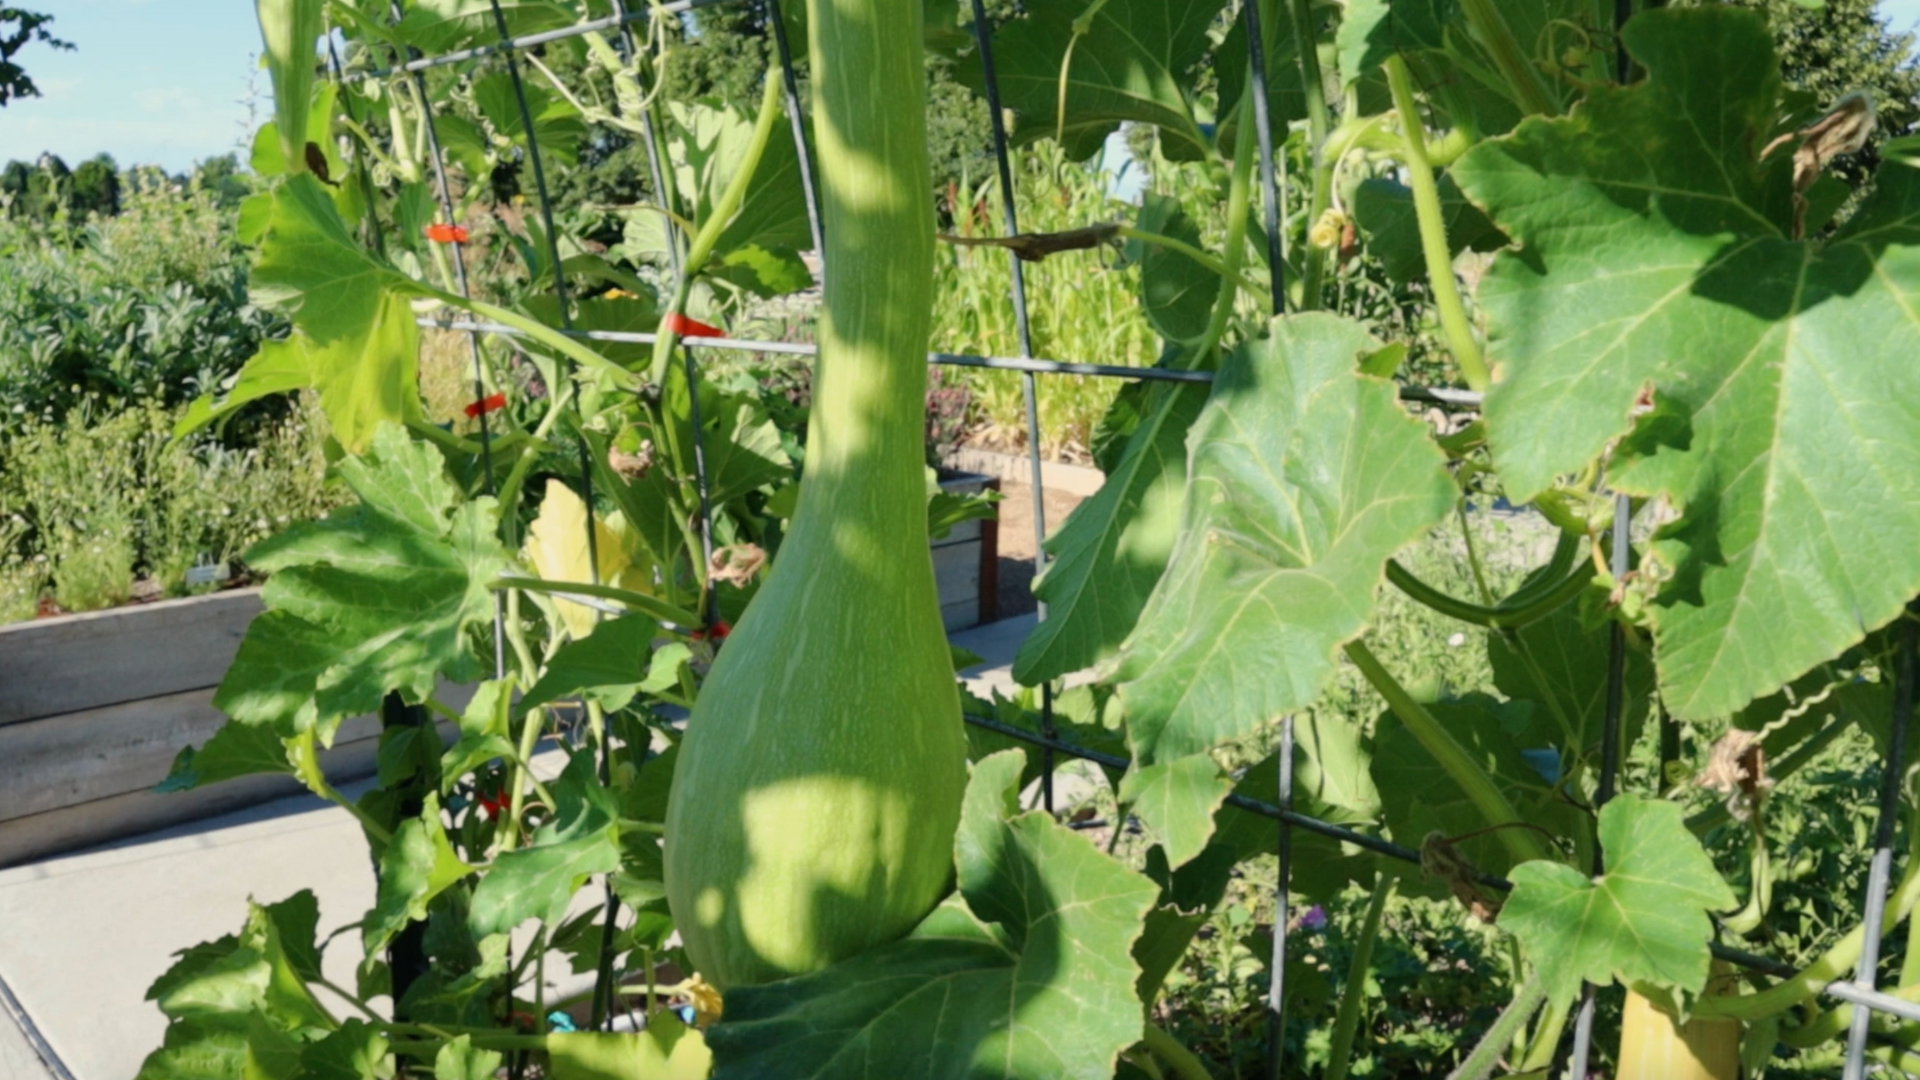 A light green zucchini rampicante hanging down from trellises, surrounded by green leaves...